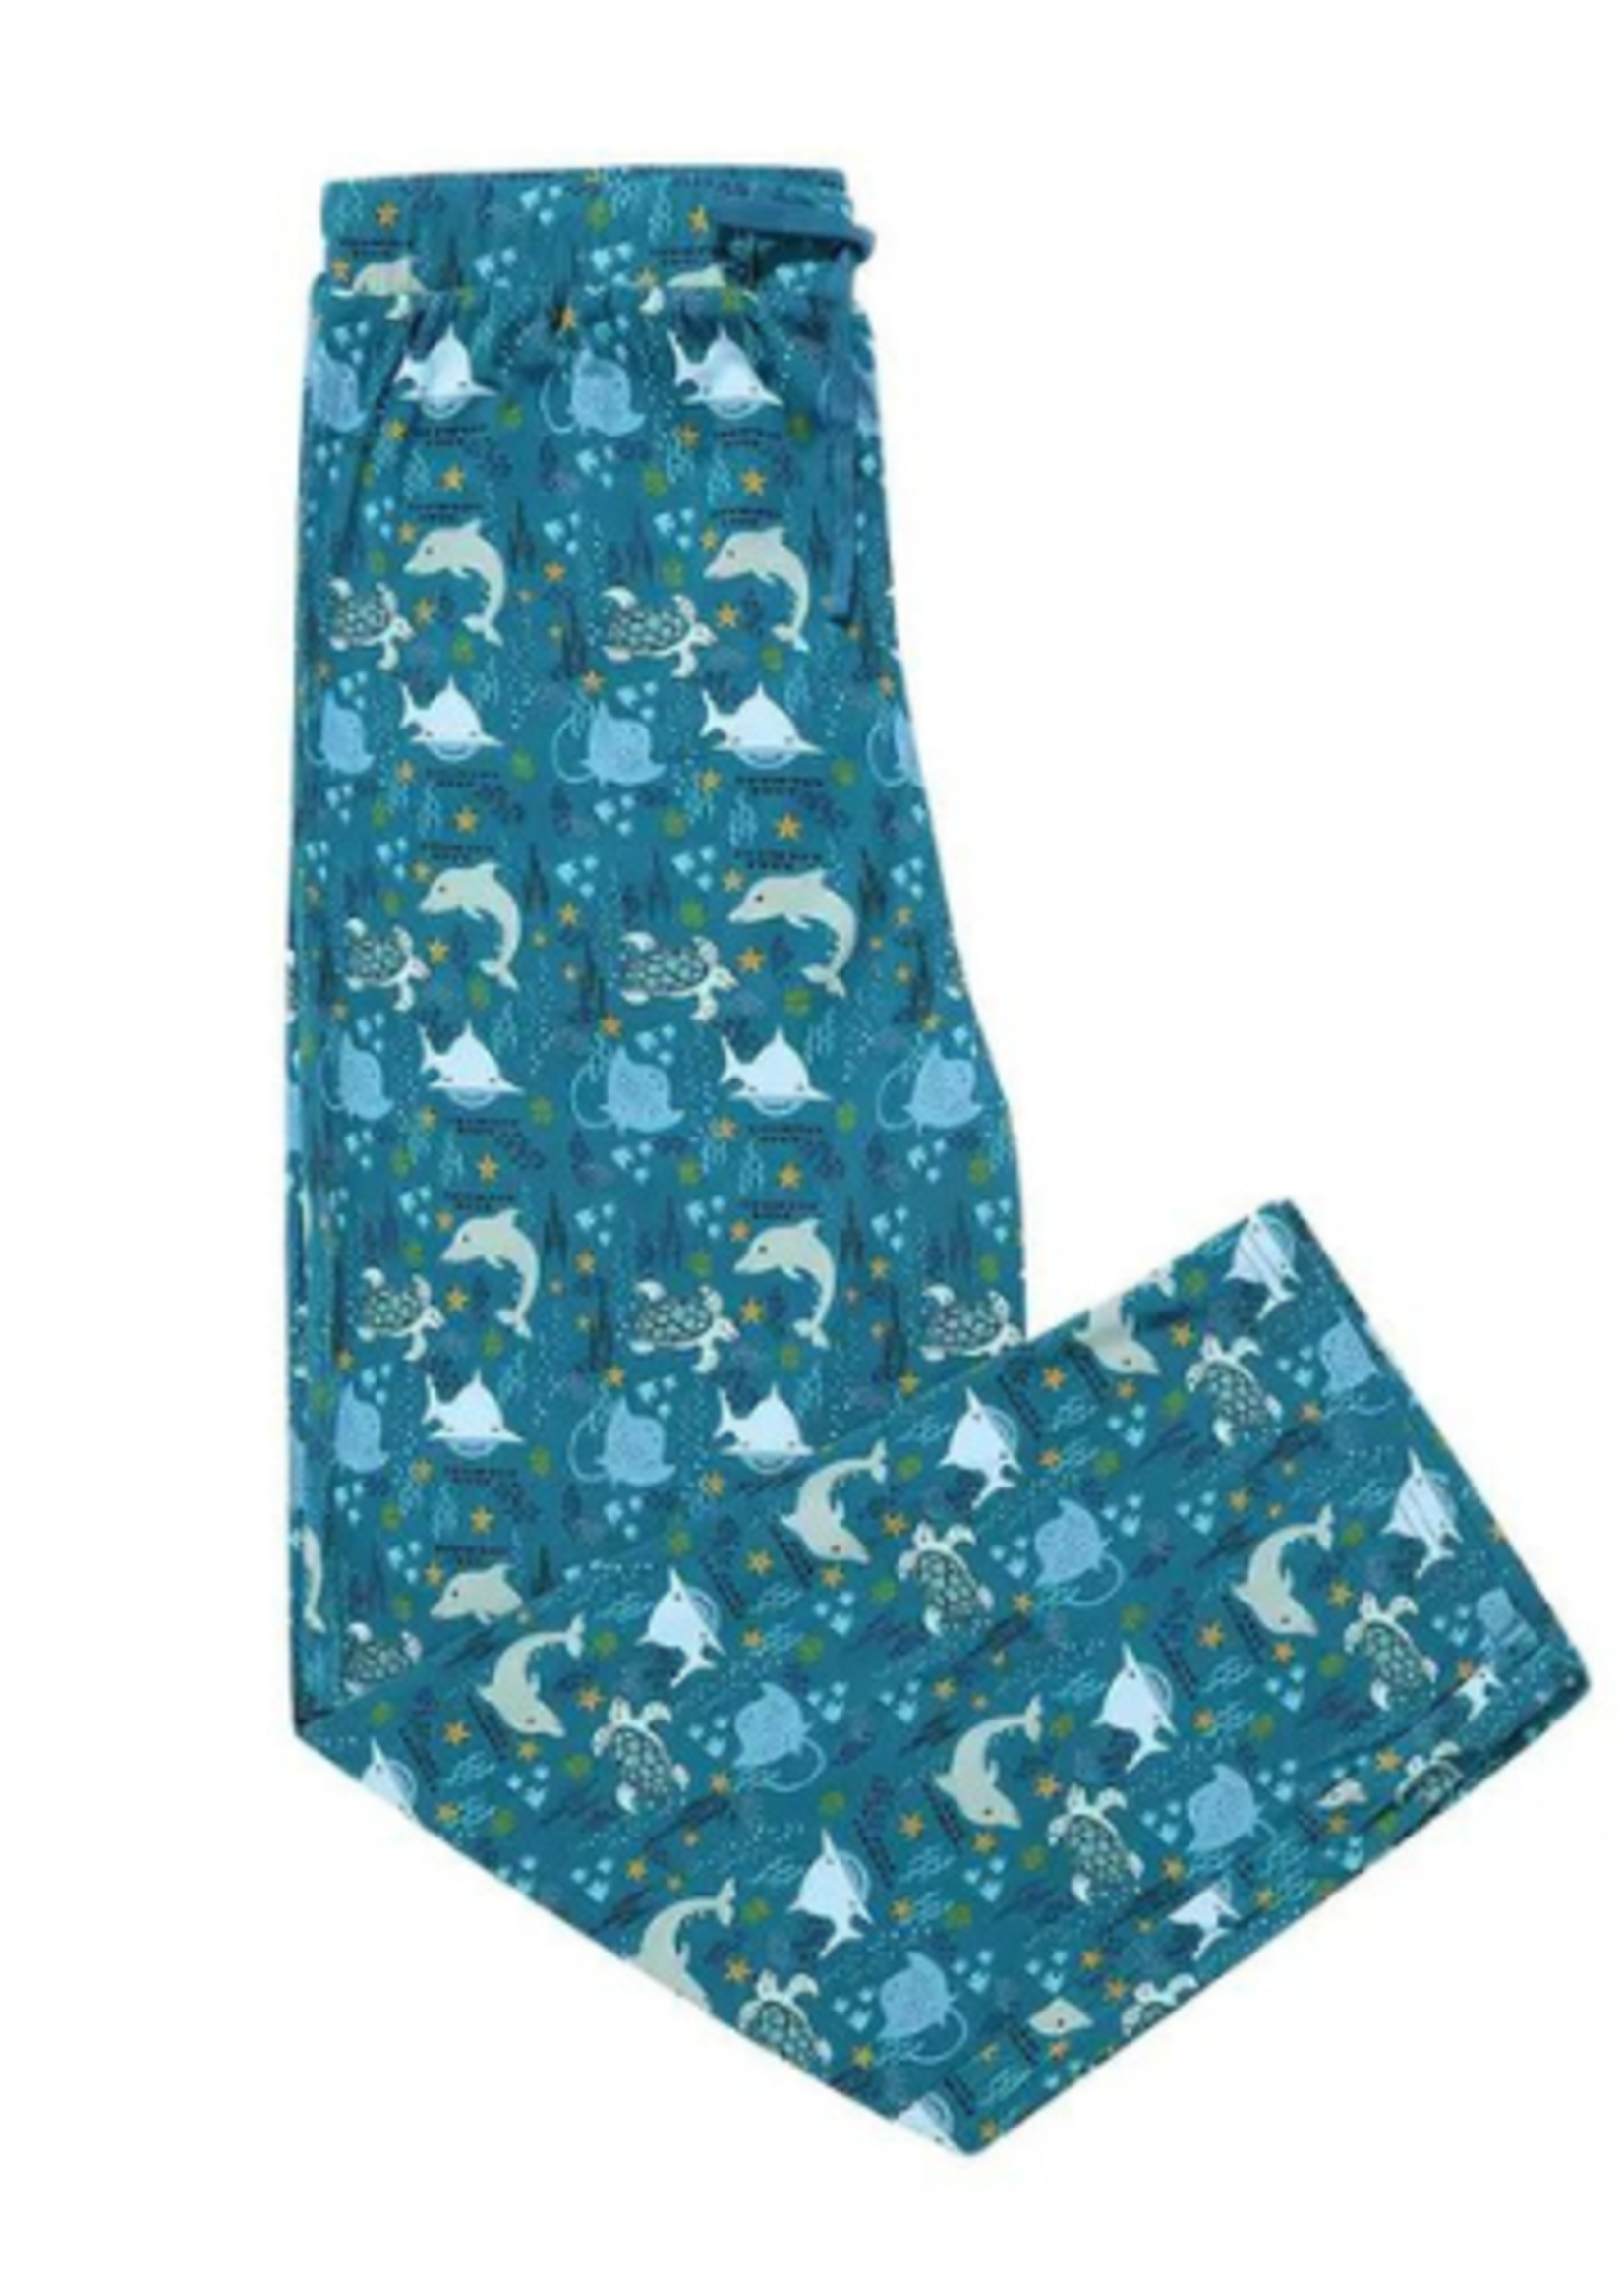 Emerson and Friends Ocean Friends Relaxed Bamboo Lounge Pajama Pants